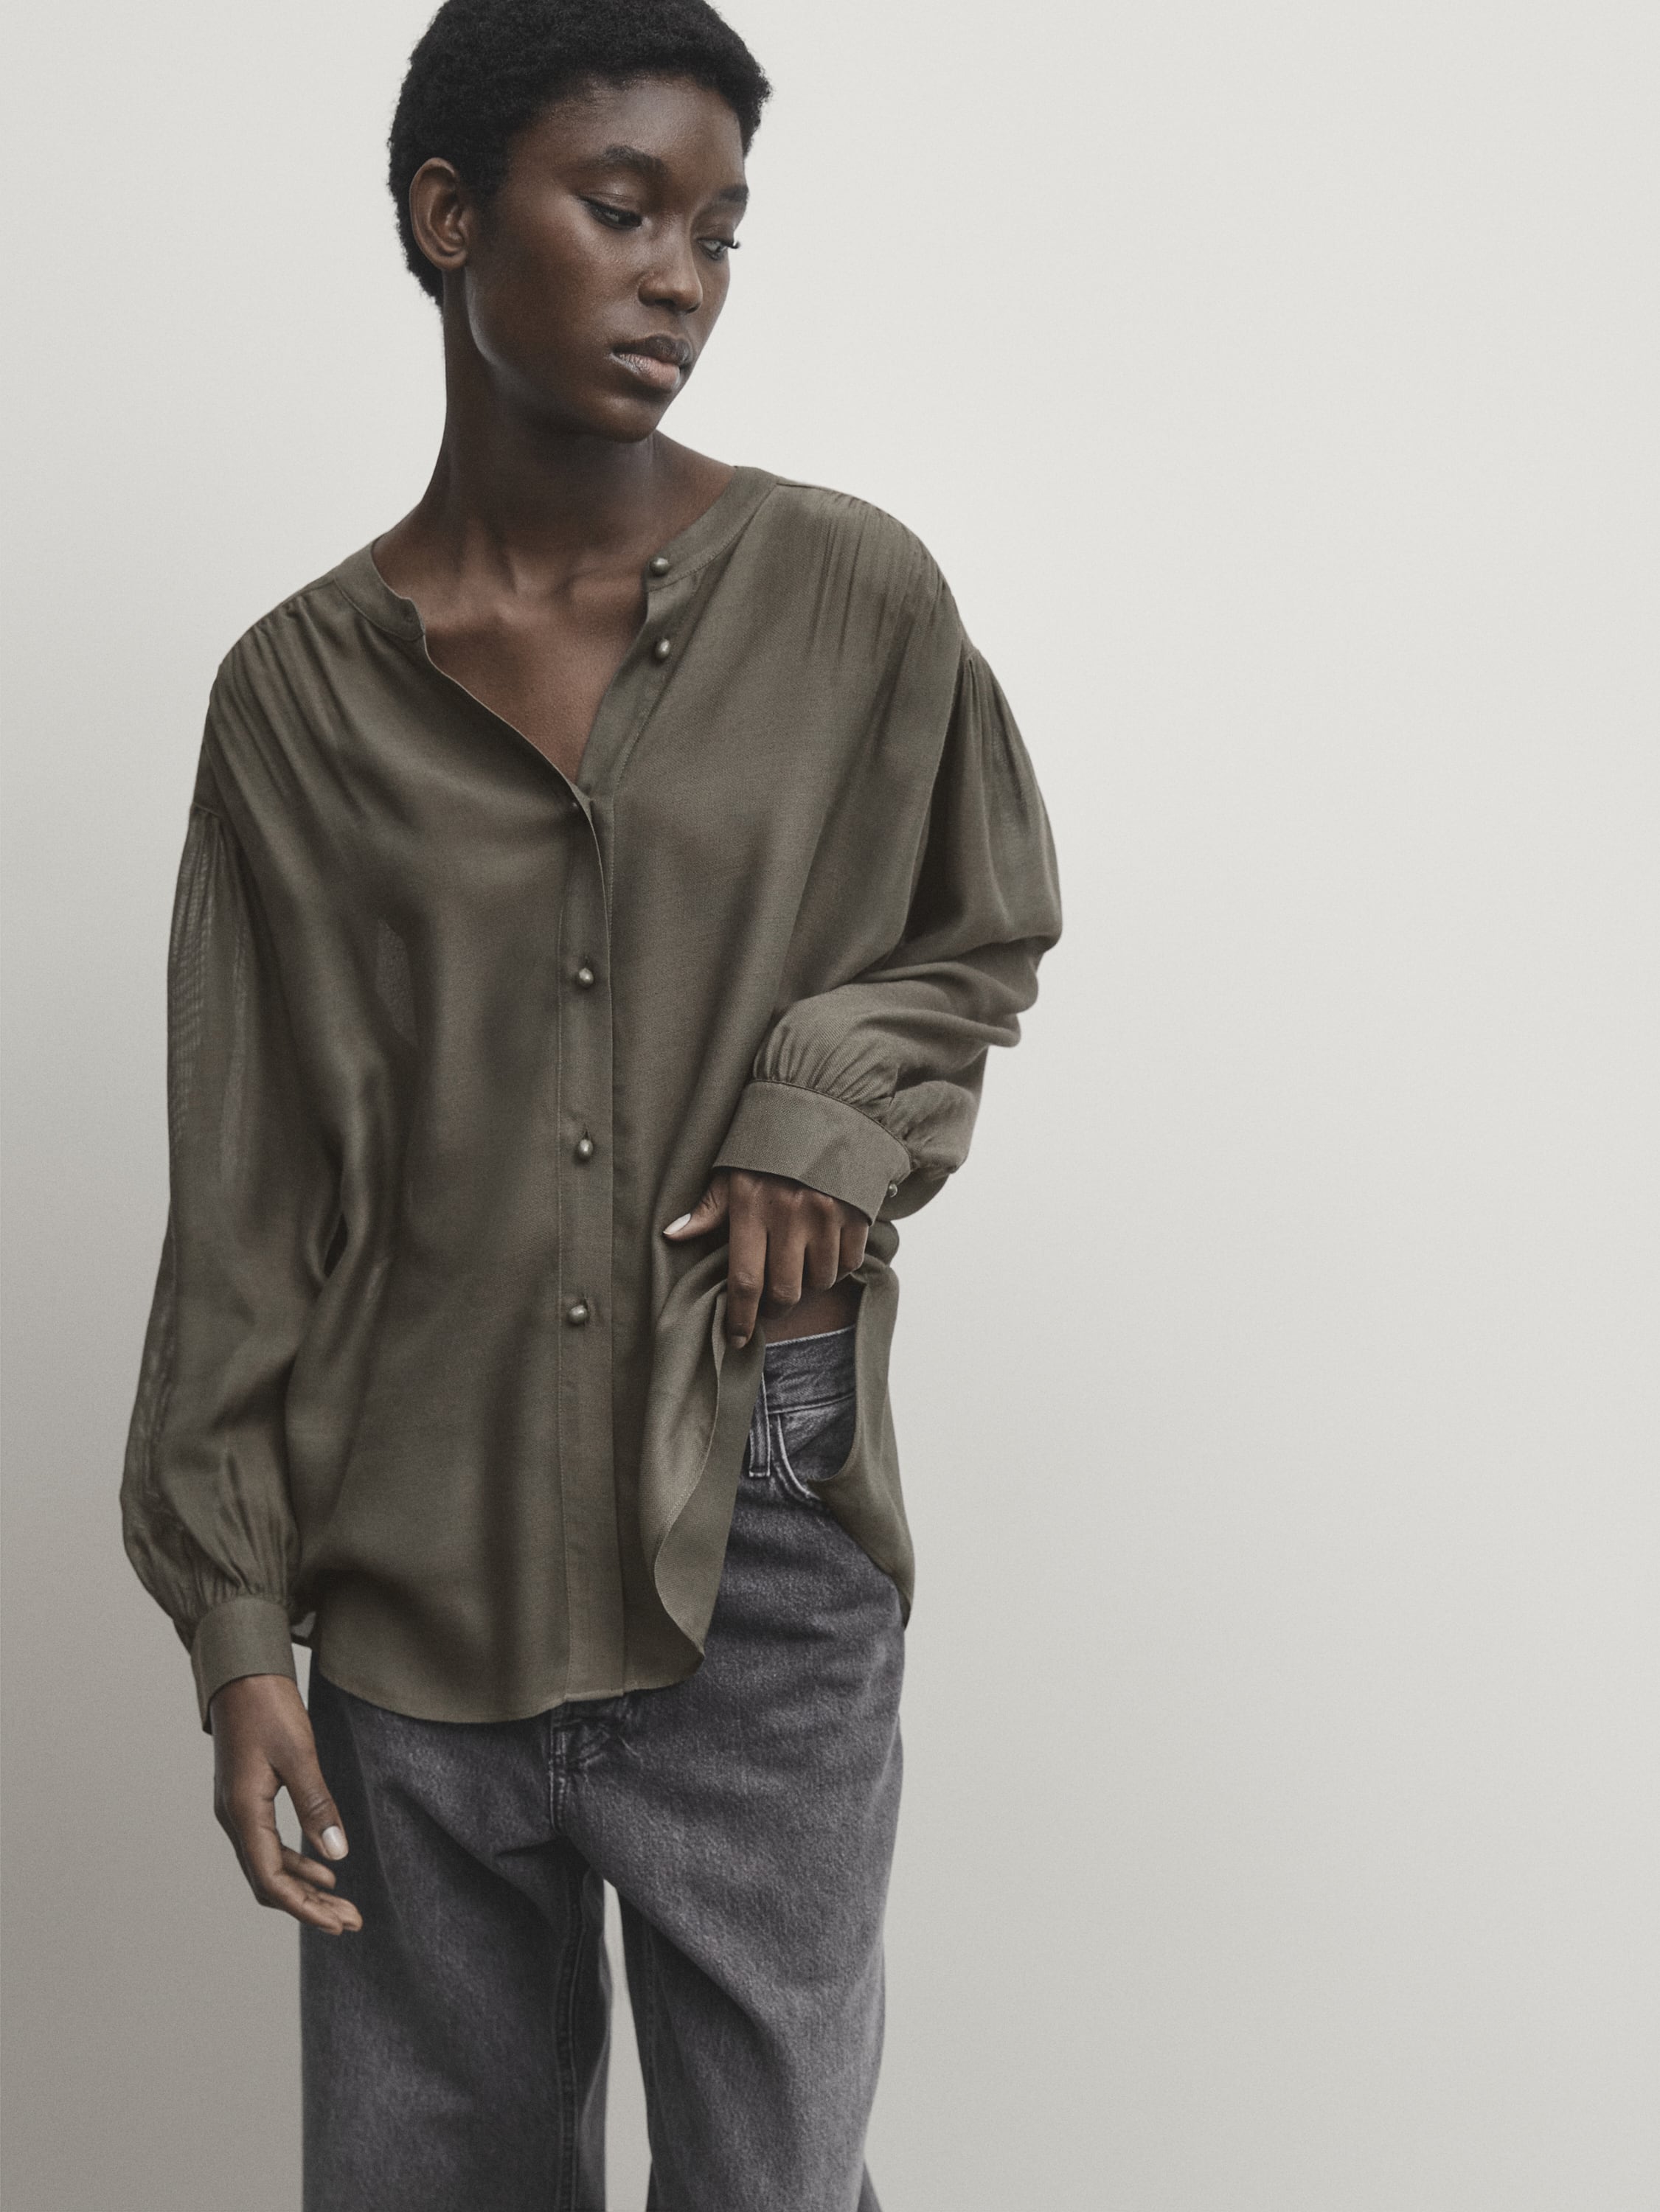 Flowing shirt with stand-up collar